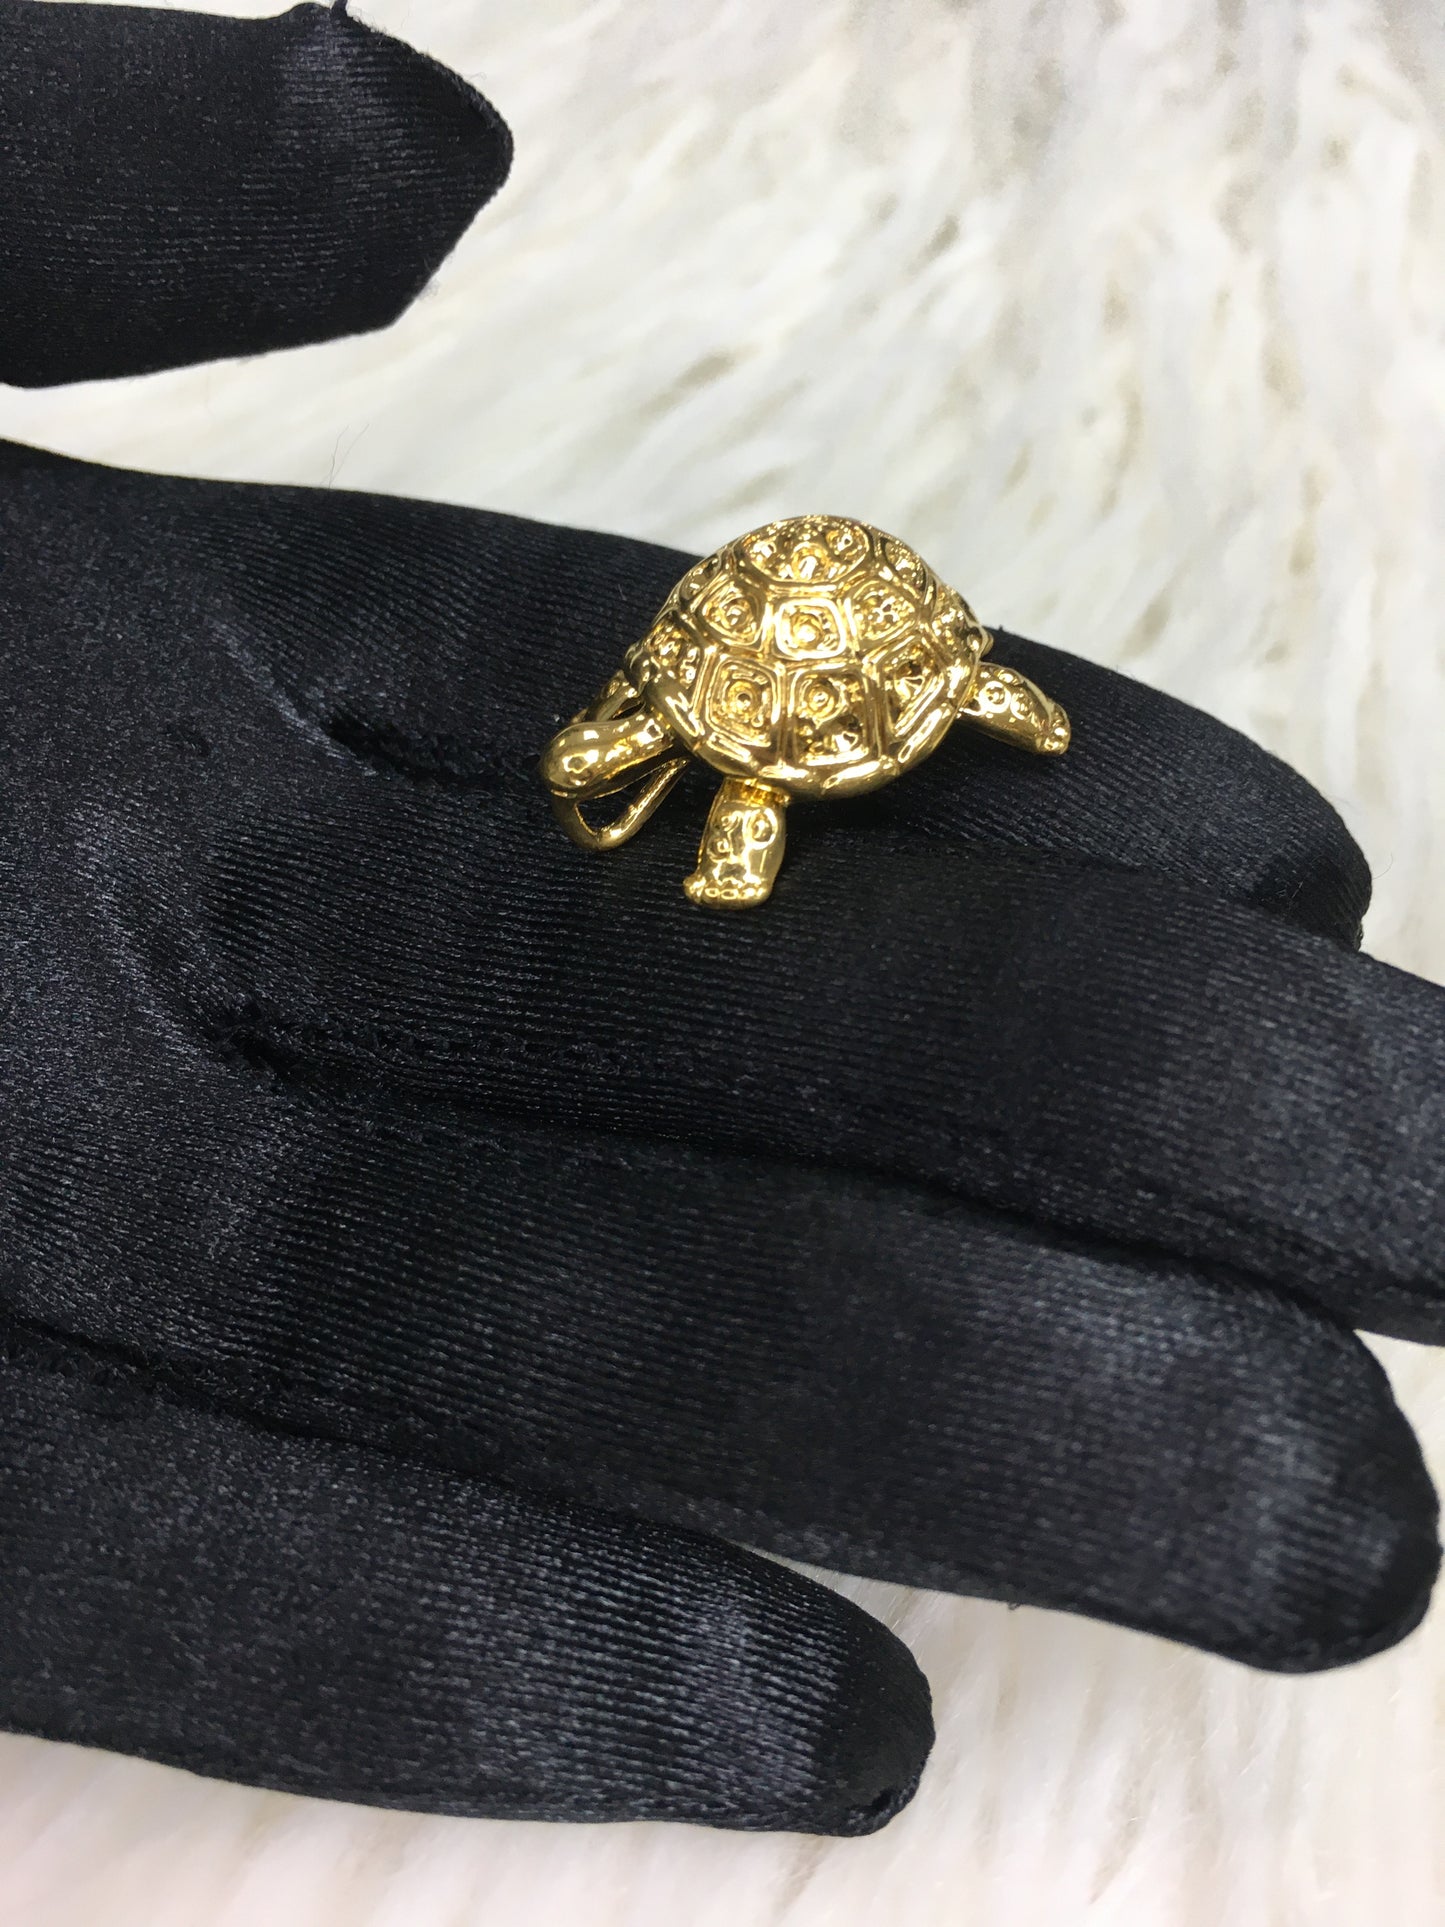 24k gold plated turtle pendant